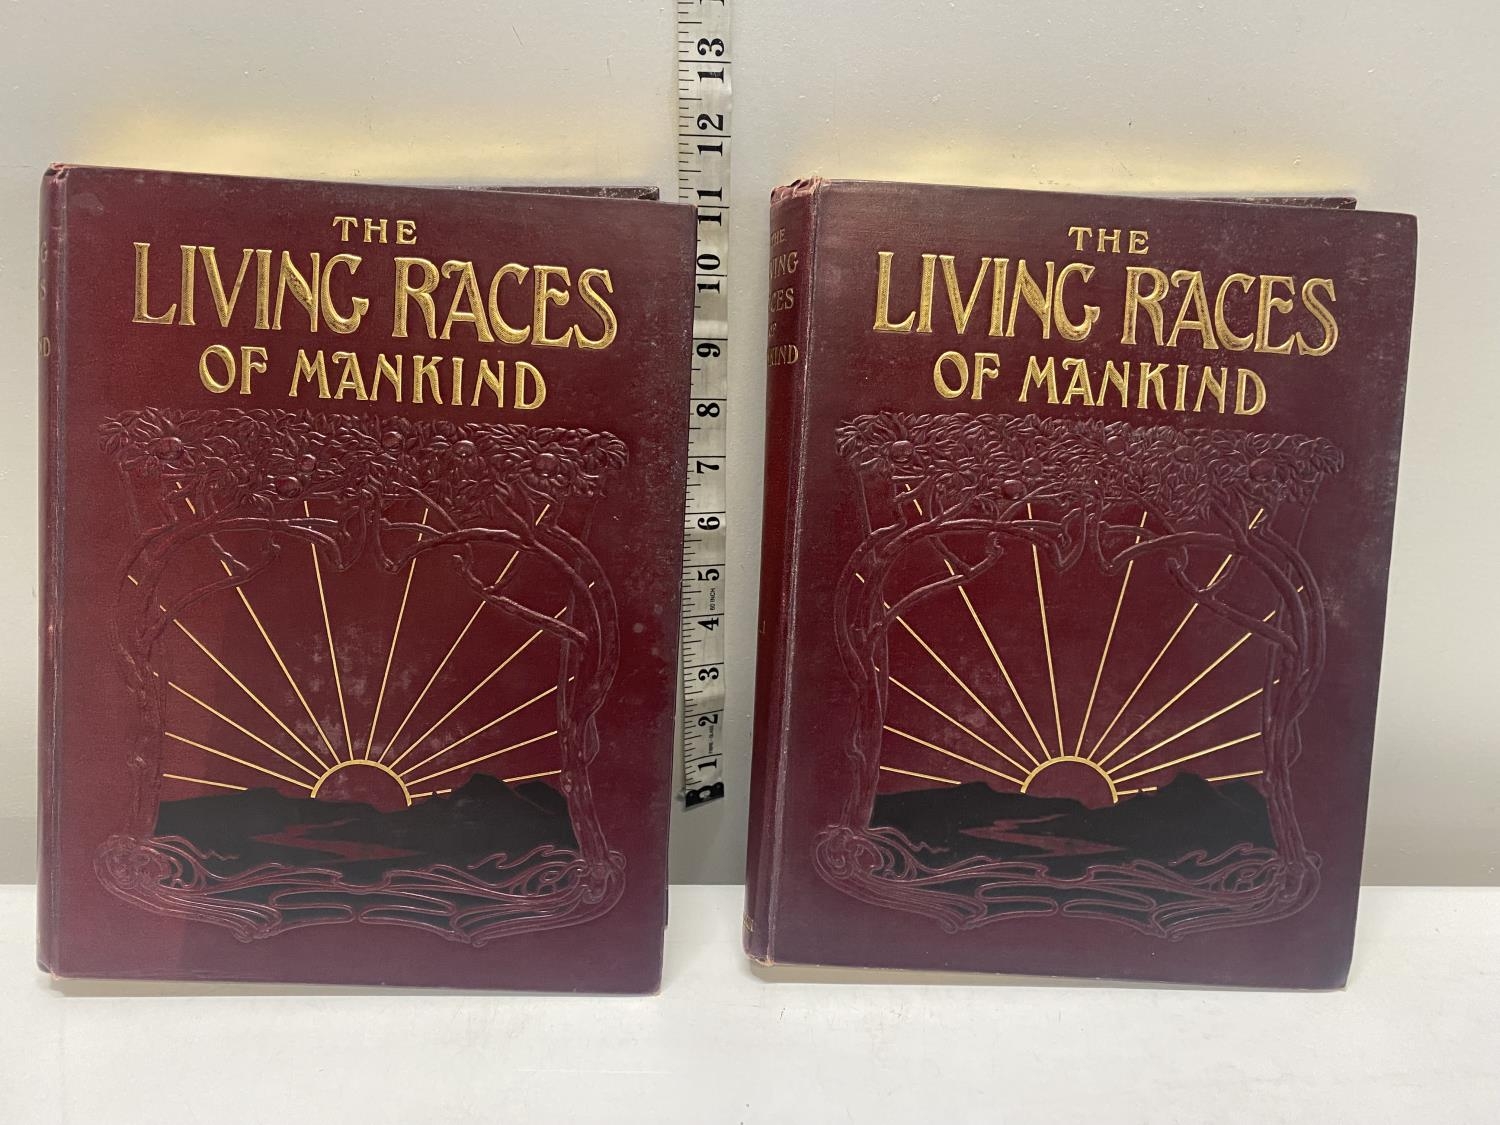 Two antique volumes of 'The Living Races of Man Kind' volumes I & II